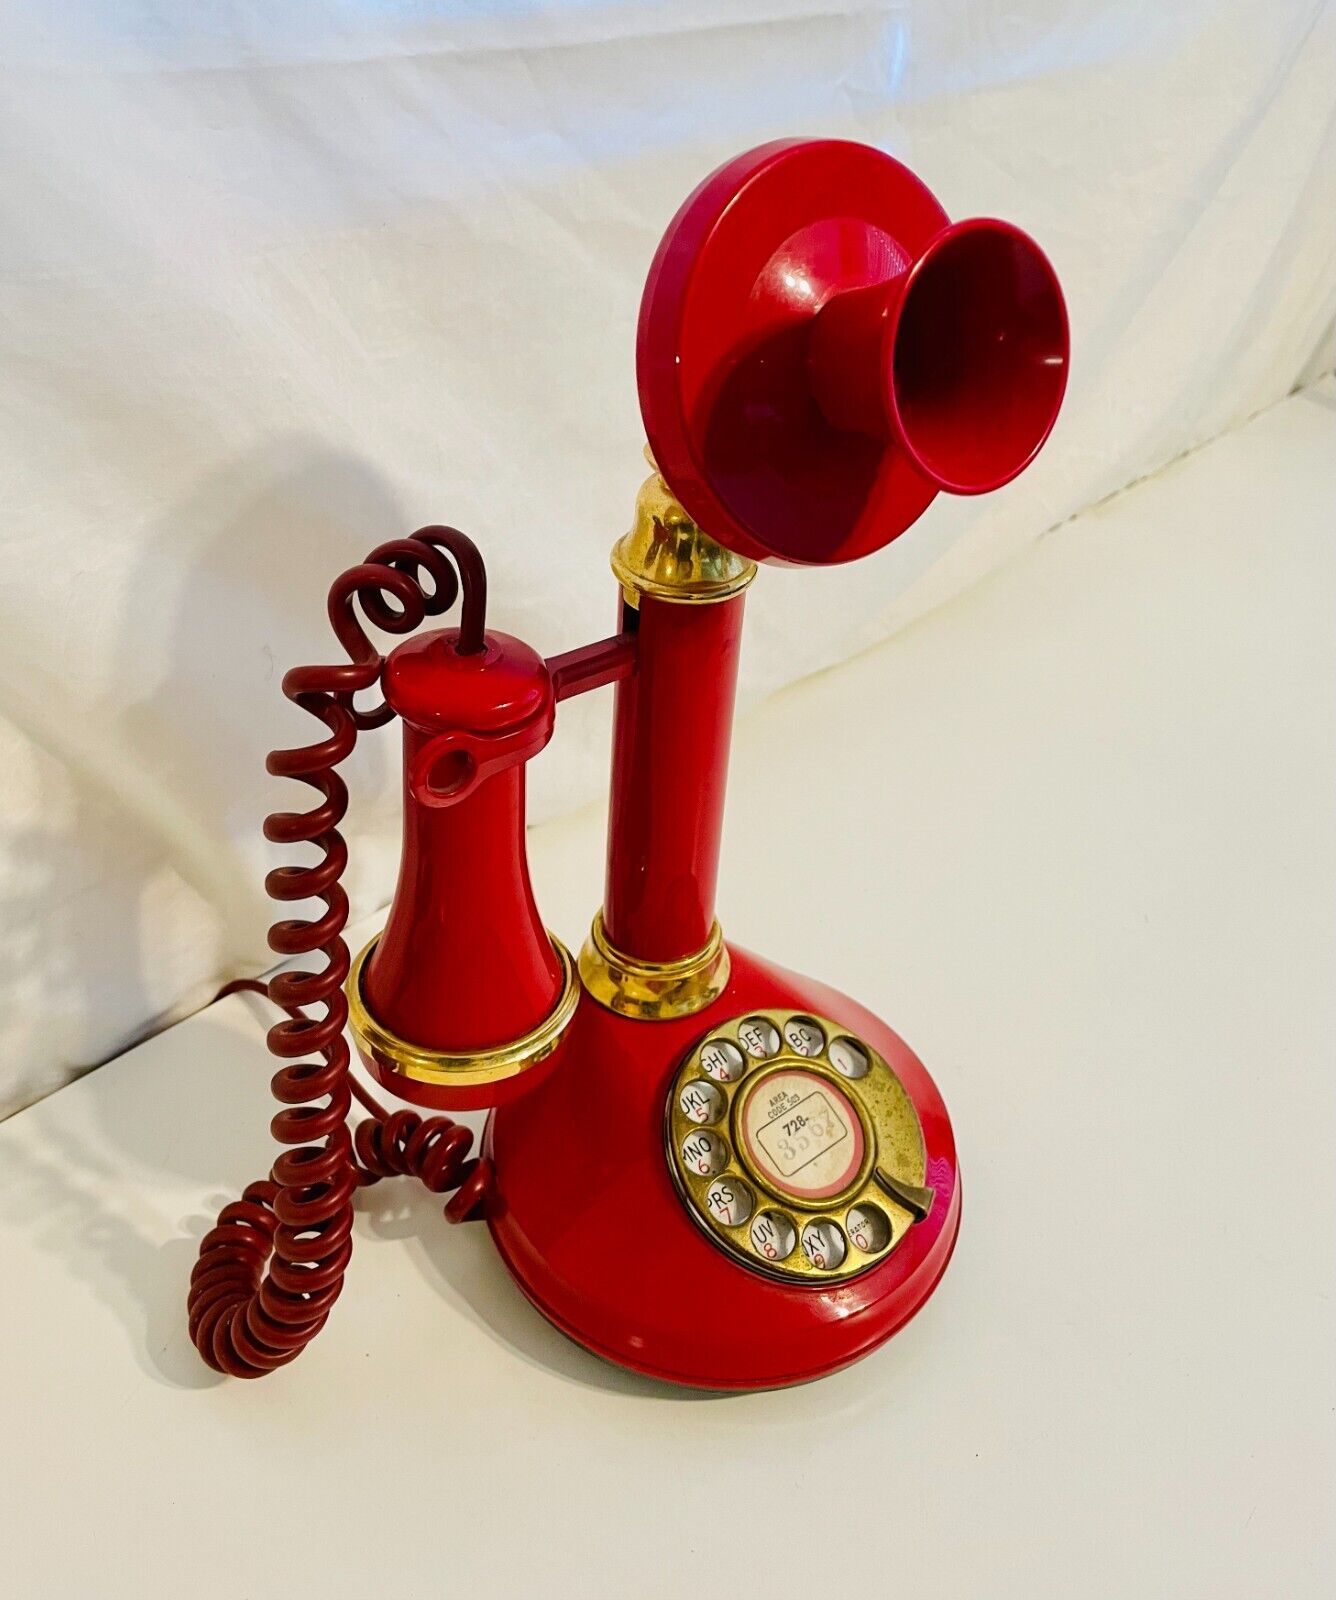 Vintage Retro Deco-Tel Candlestick Telephone Rotary Dial Phone Red UNTESTED